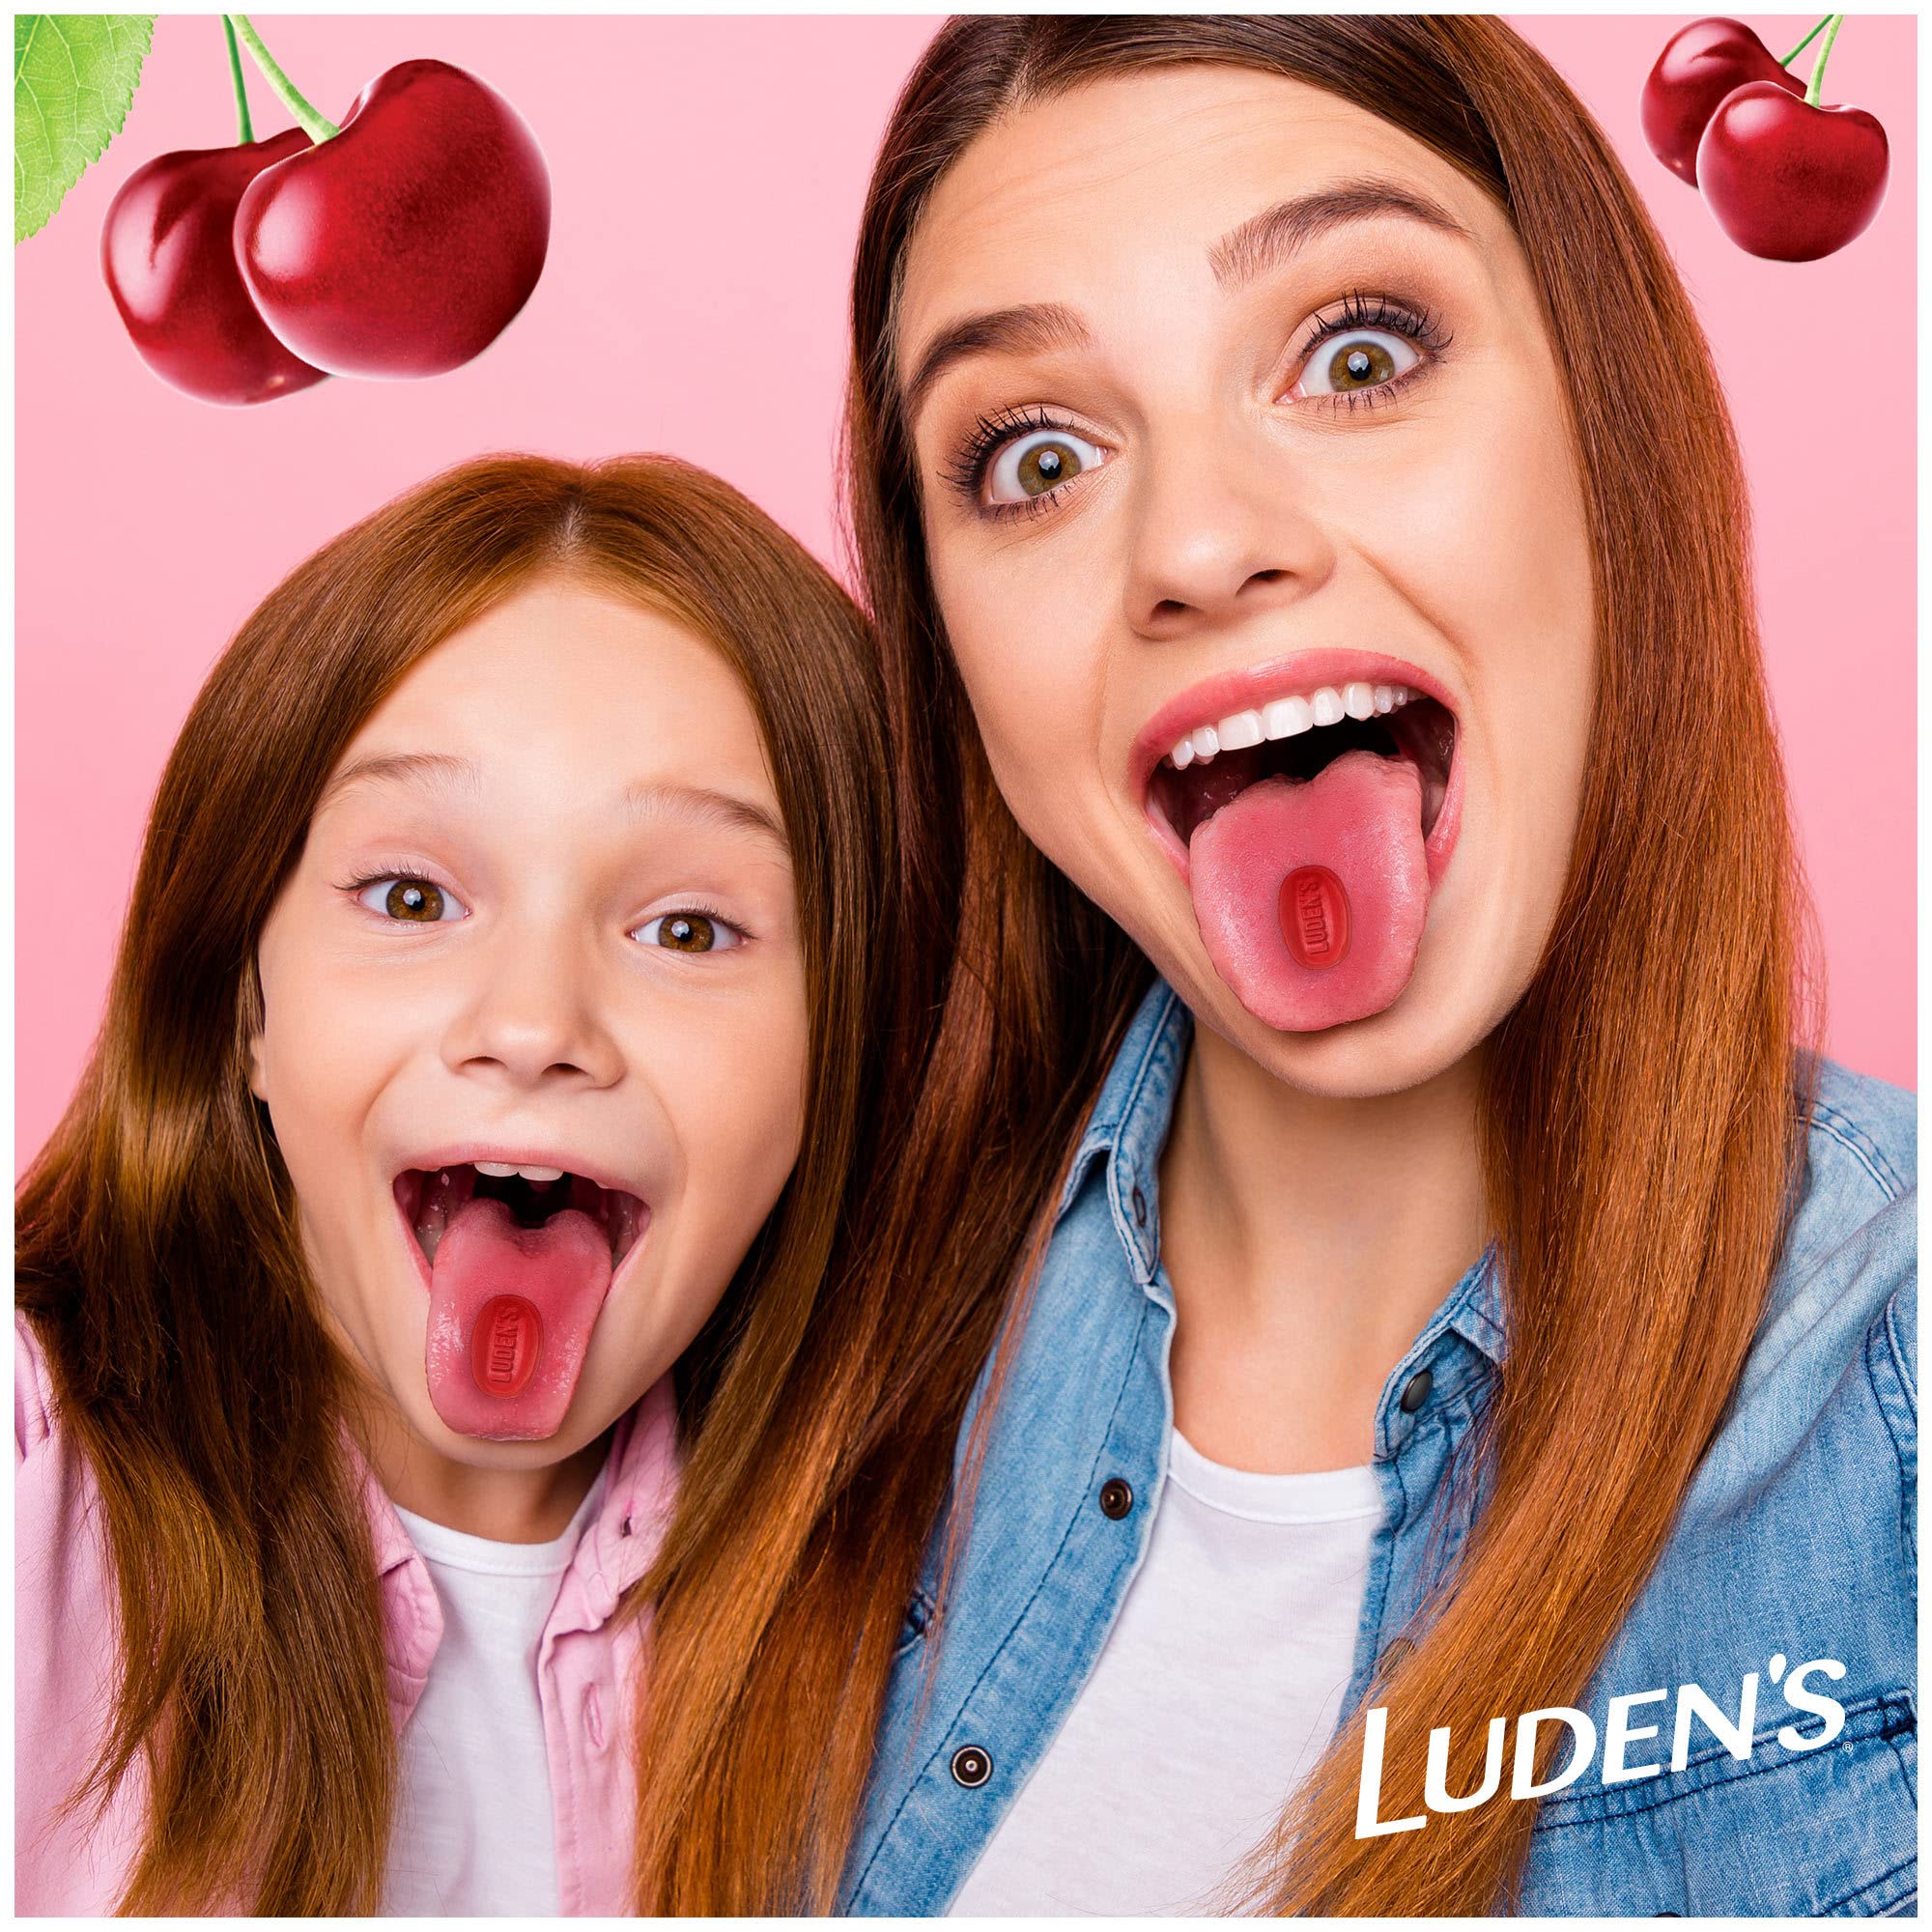 Ludens Deliciously Soothing Throat Drops, Wild Cherry Flavor, 90 Count